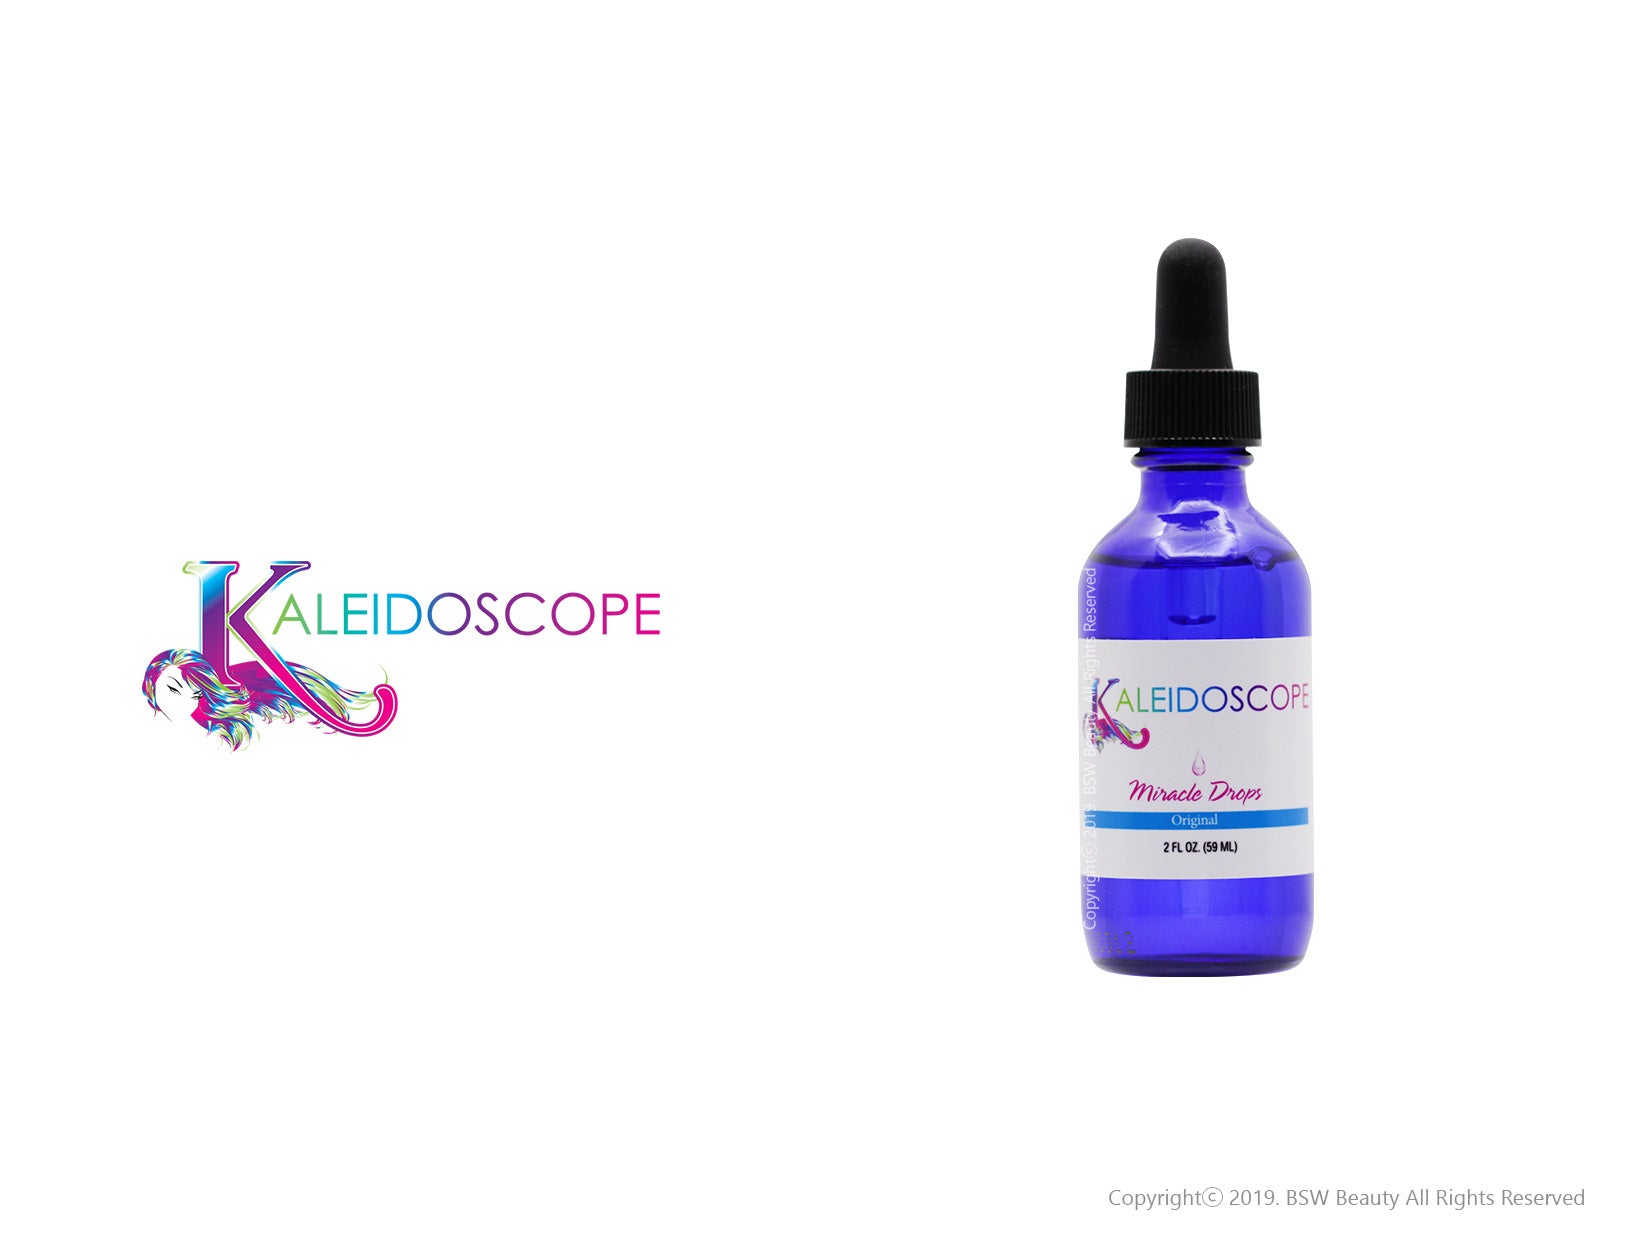 kaleidoscope miracle drops owner